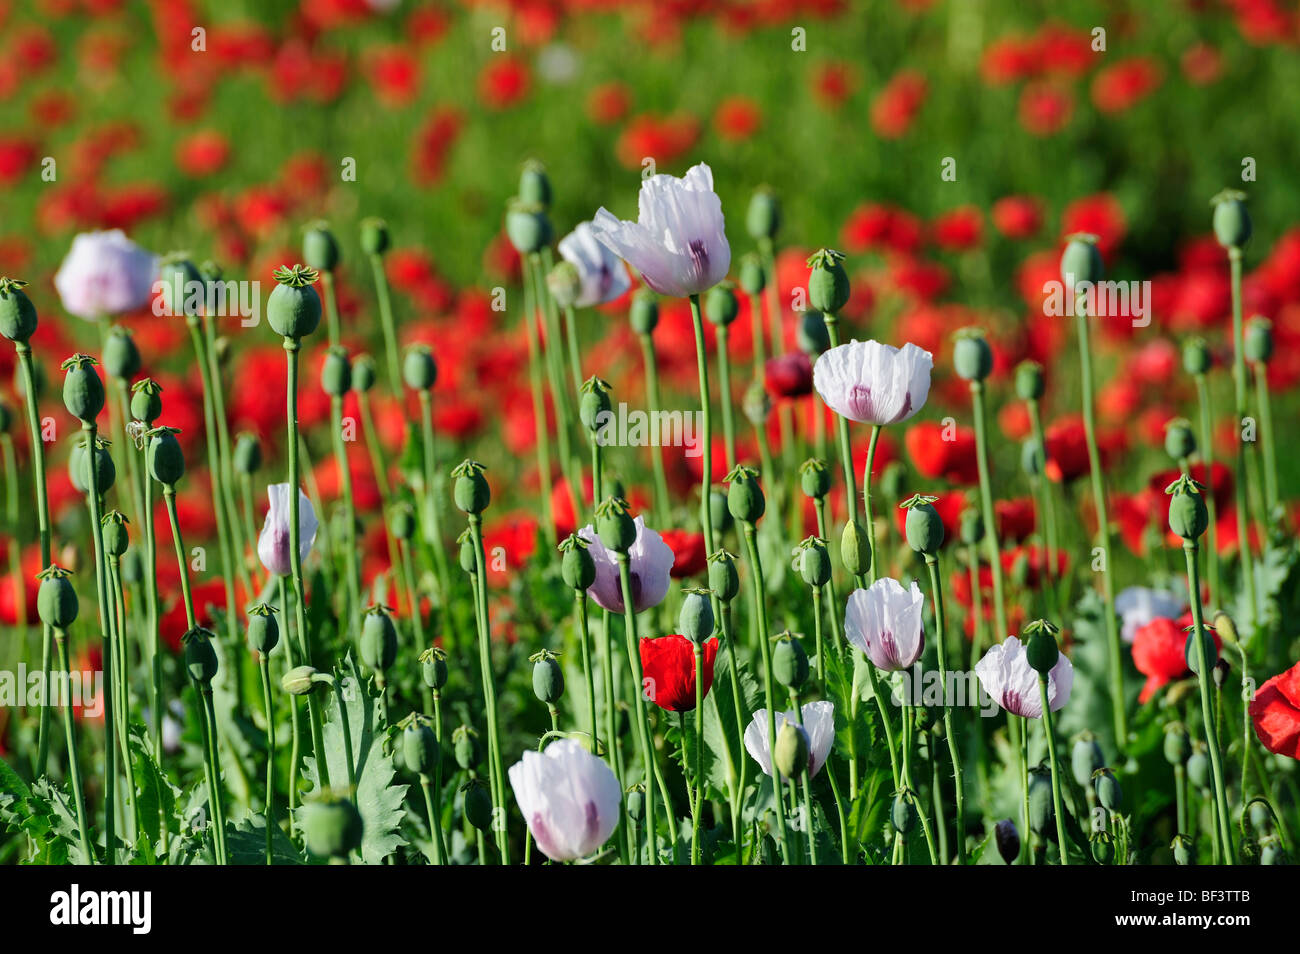 Poppy wild flowers red poppies red green nature environment poppy fields pink poppies Stock Photo